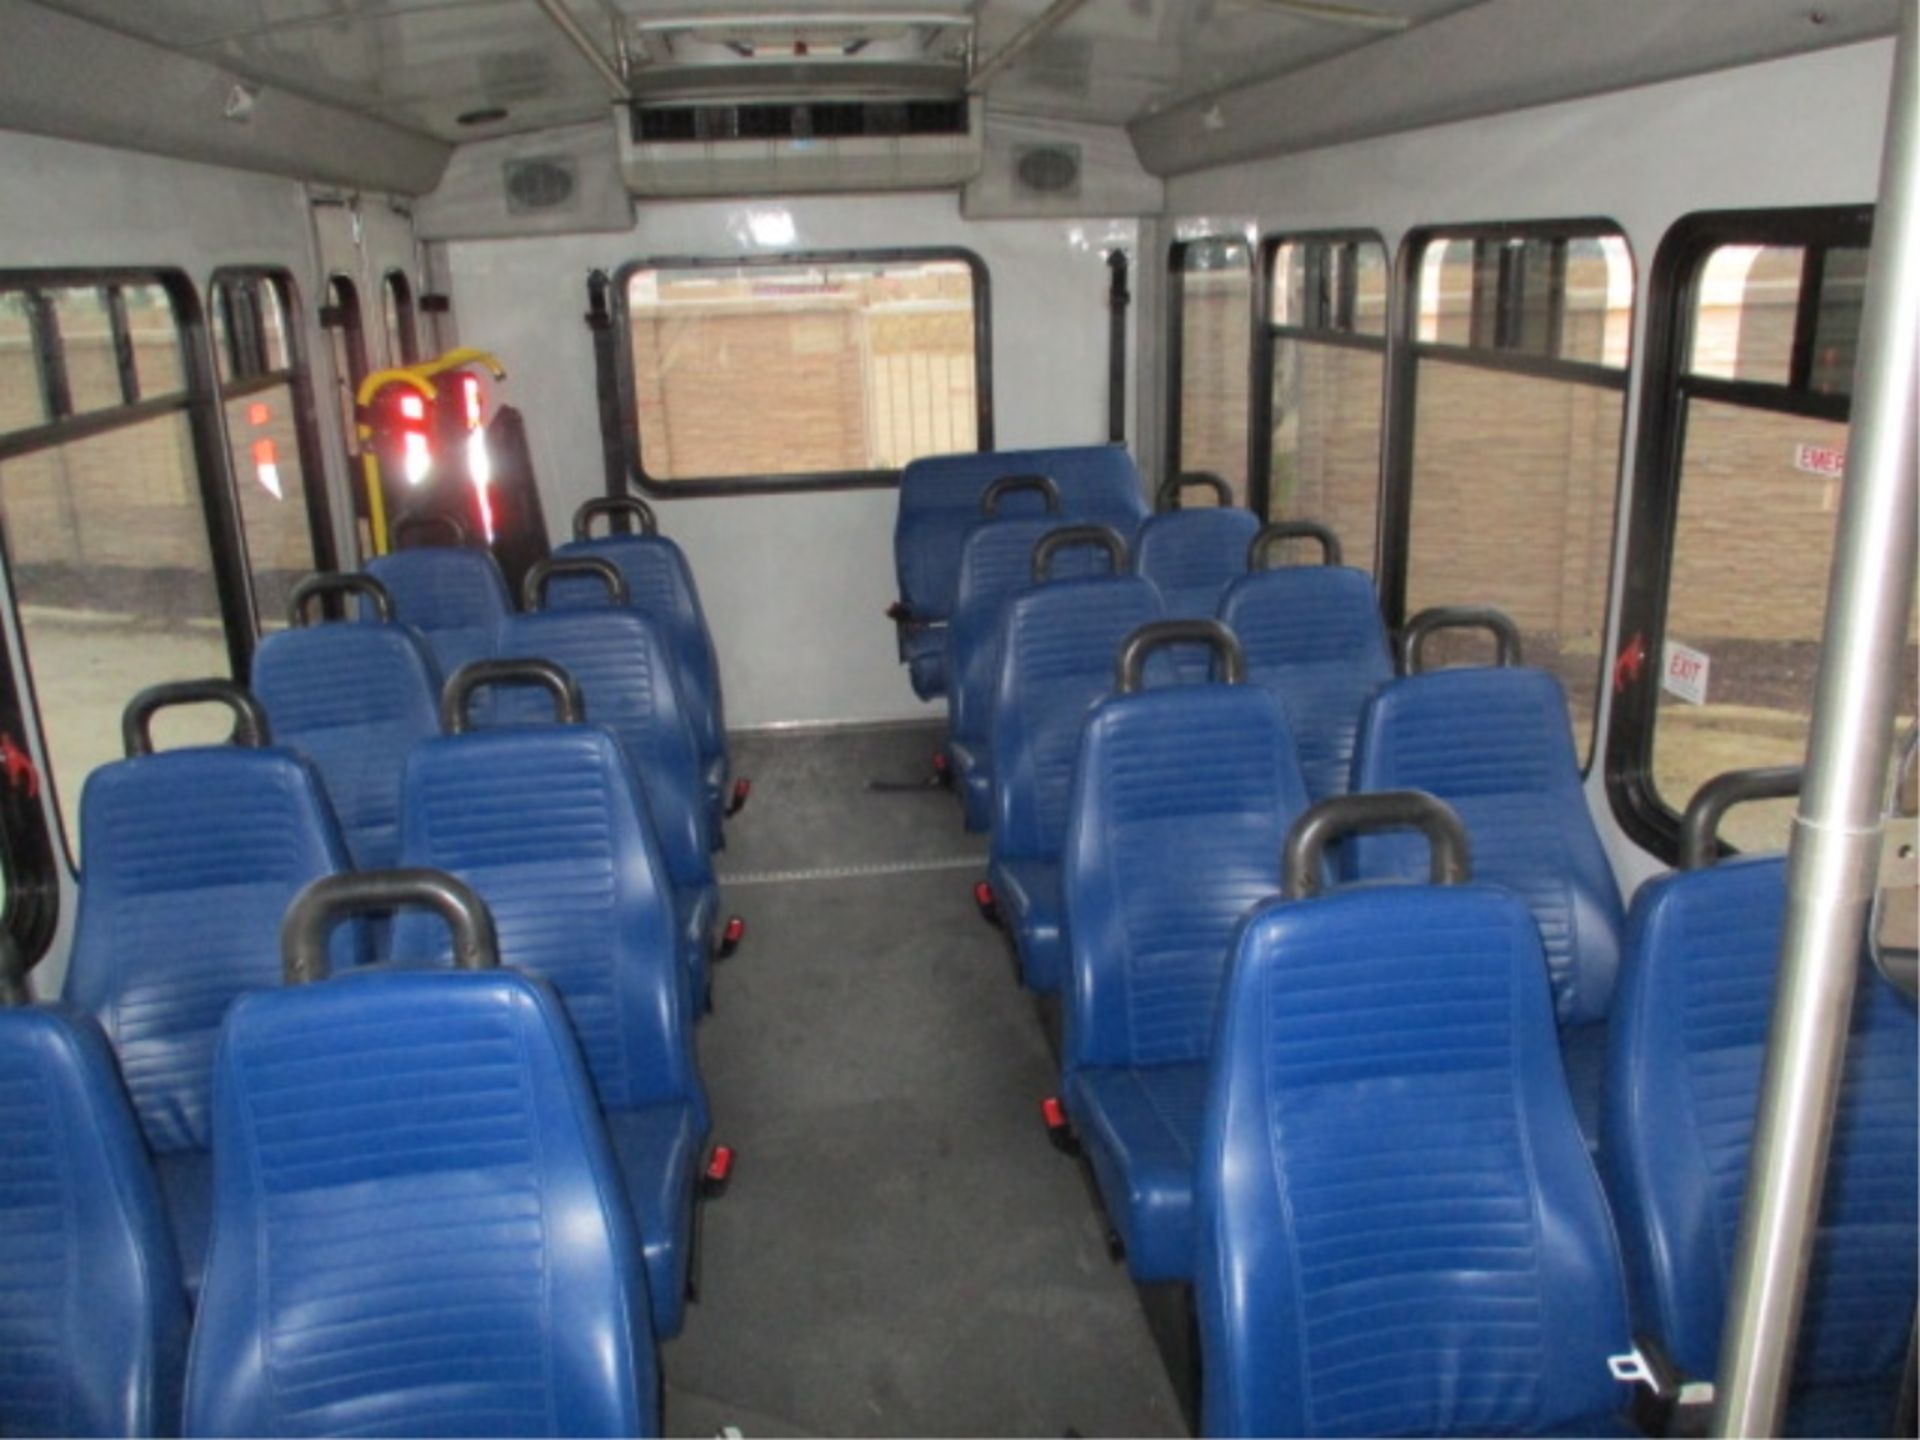 2007 Ford E450 Passenger Bus, 6.8L Gas, Automatic, 18-Passenger, Wheel Chair Lift, S/N: - Image 8 of 14